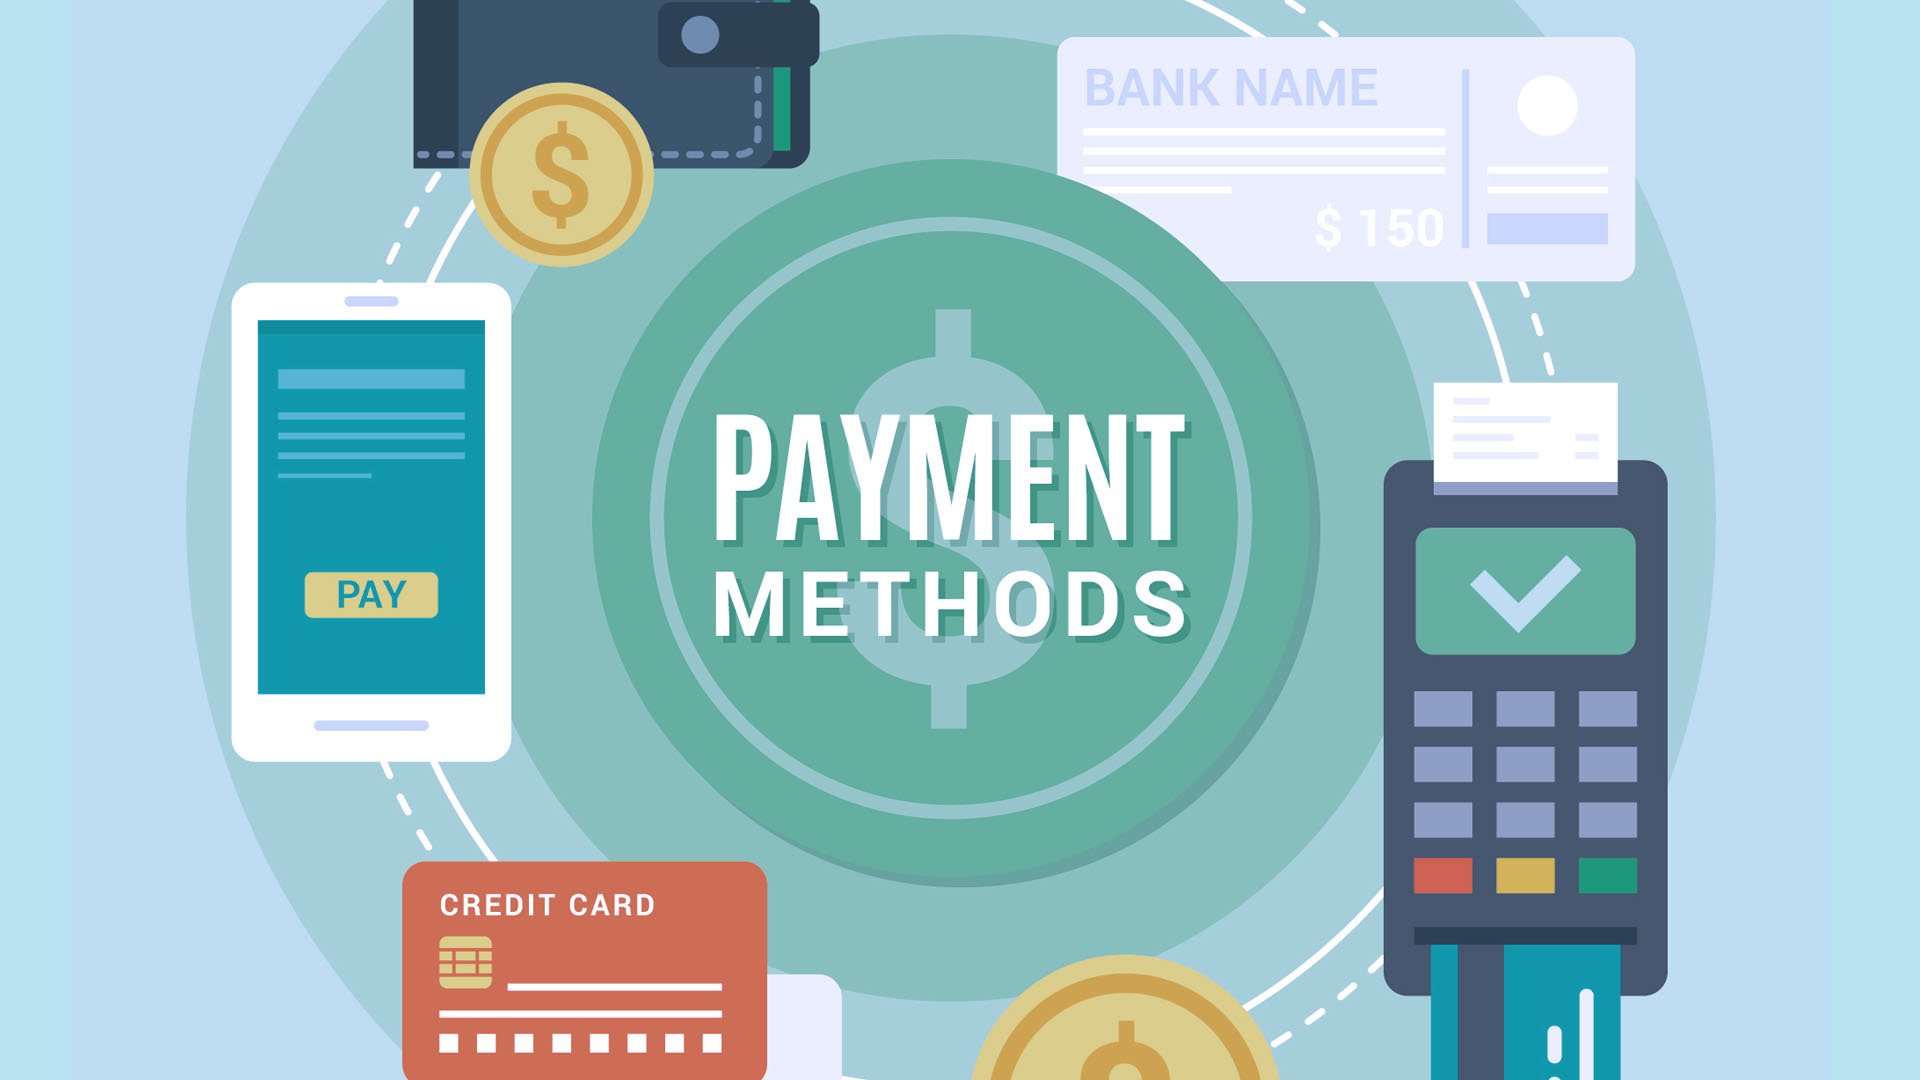 Pay method. Payment method. Credit payment methods. Payment method Types.